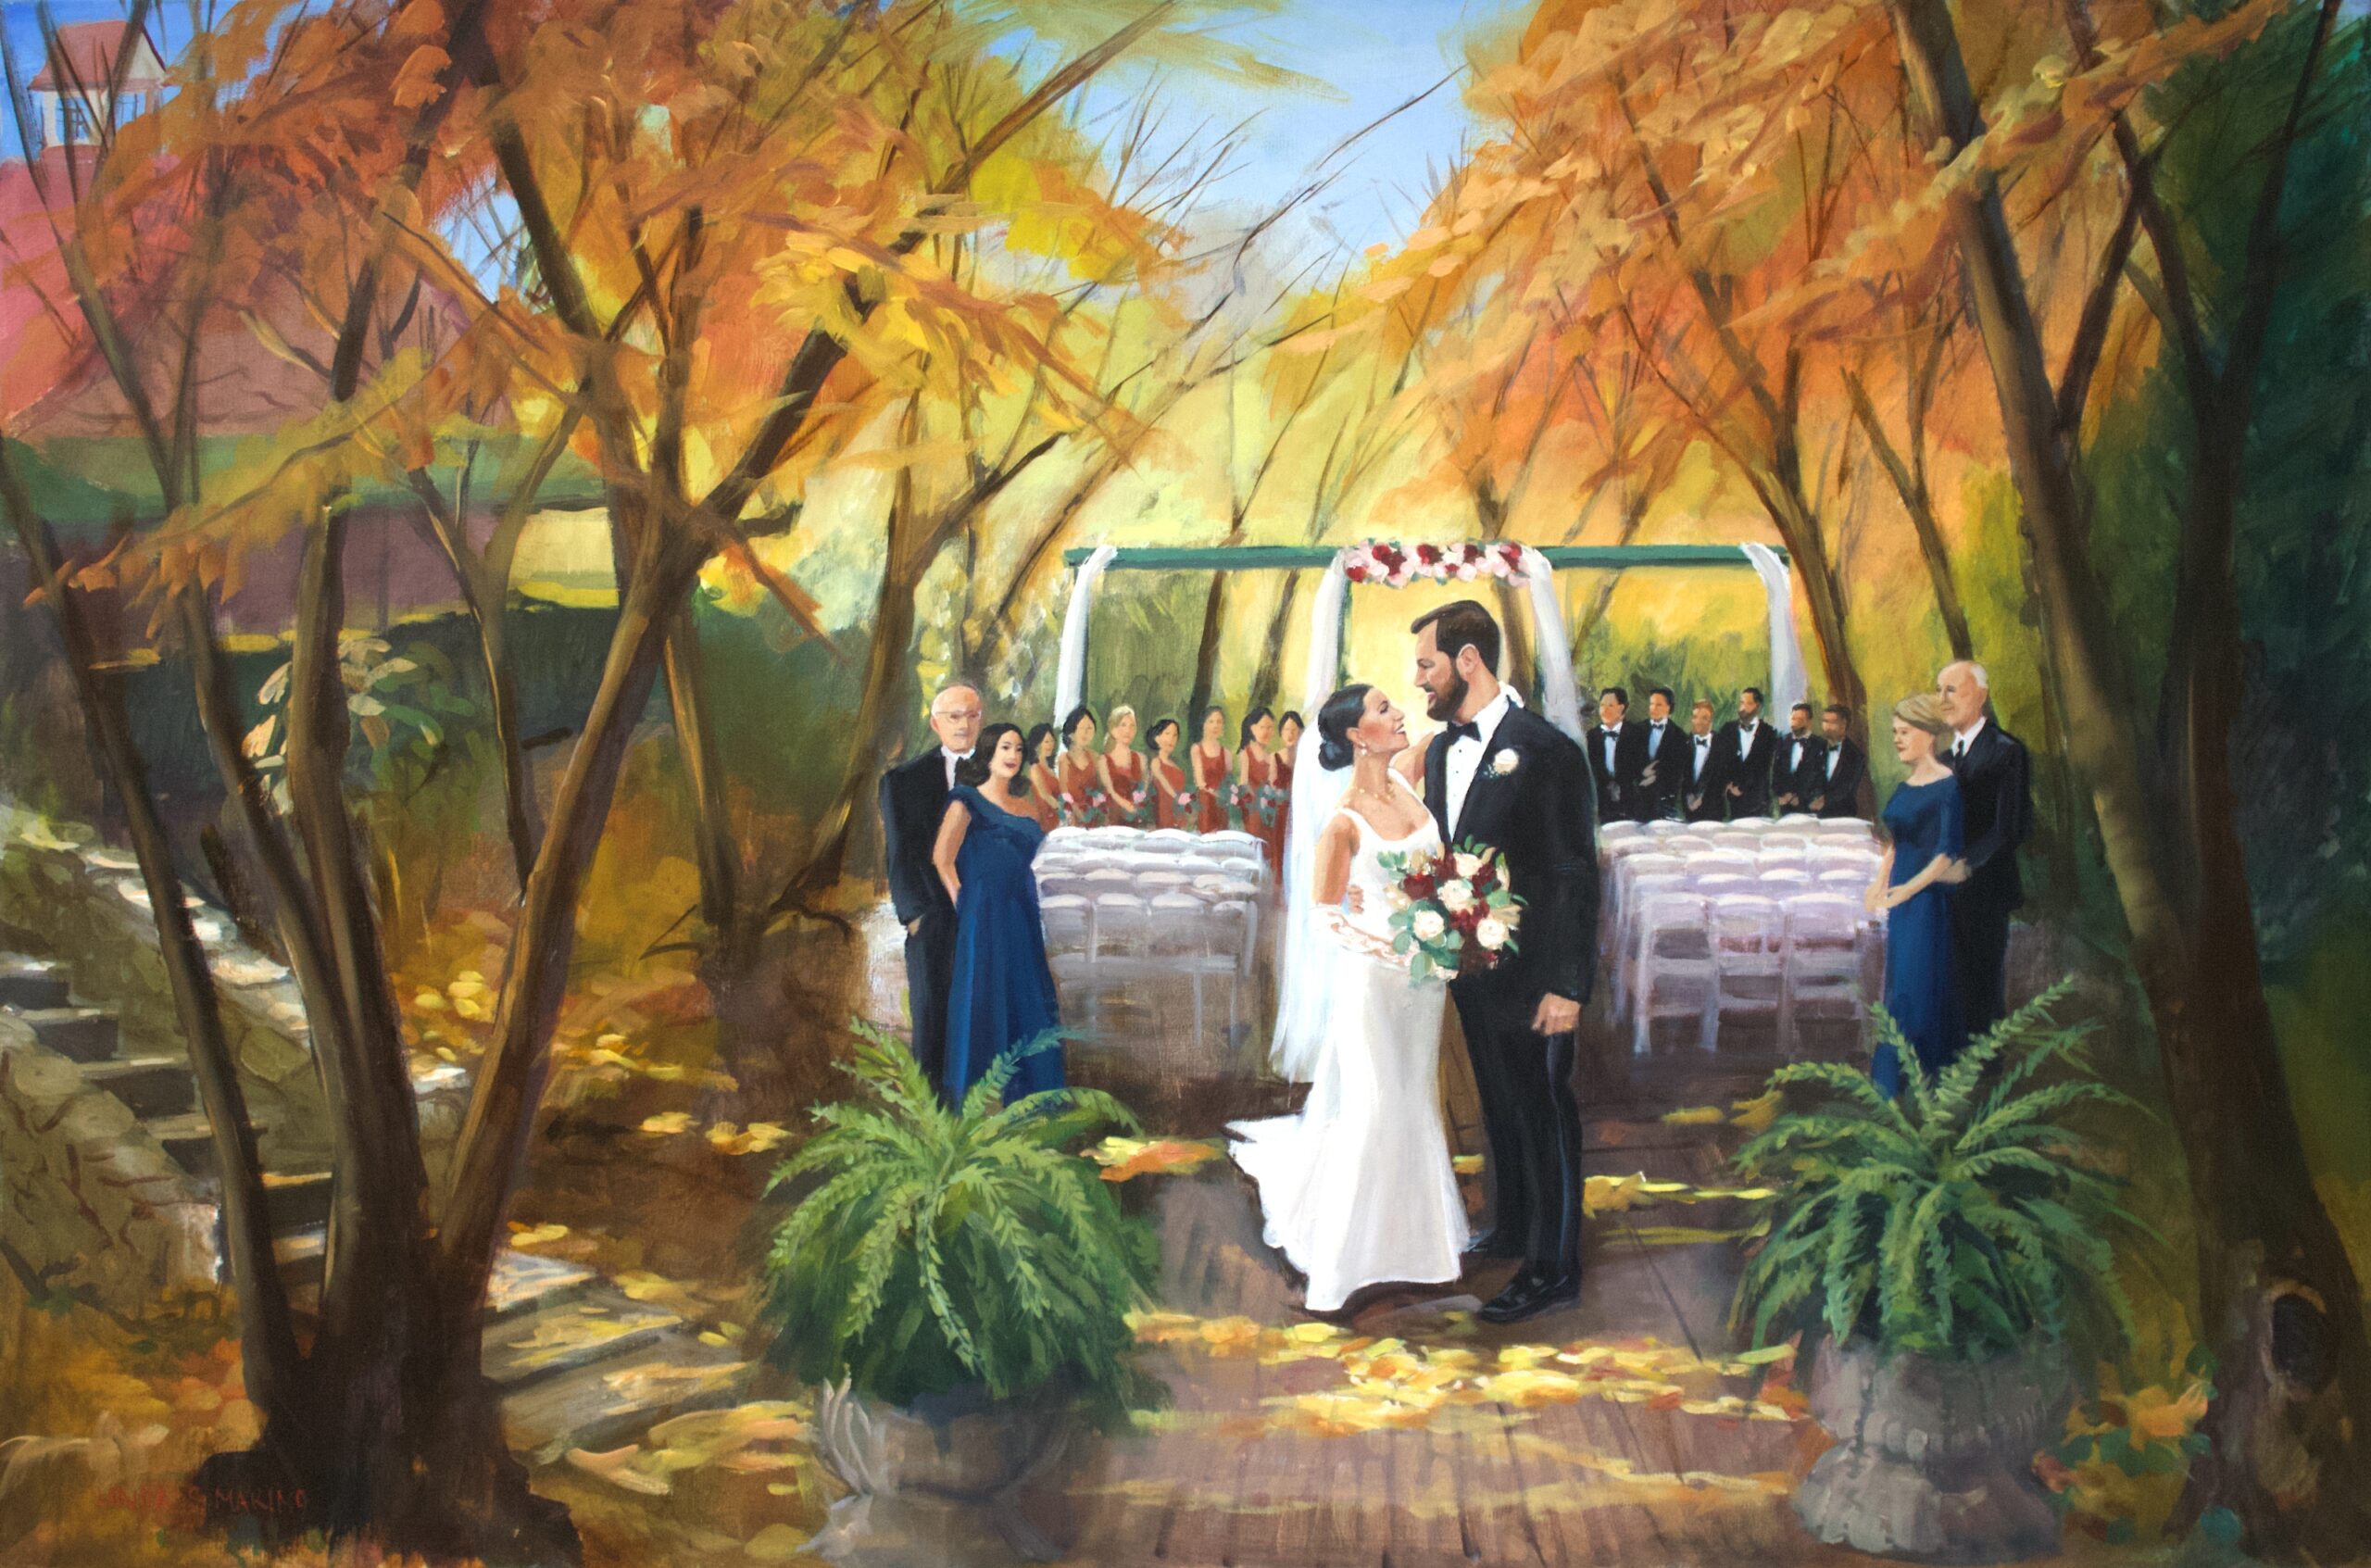 live wedding painting of bride and groom with wedding party and parents in a wooded autumn ceremony scene